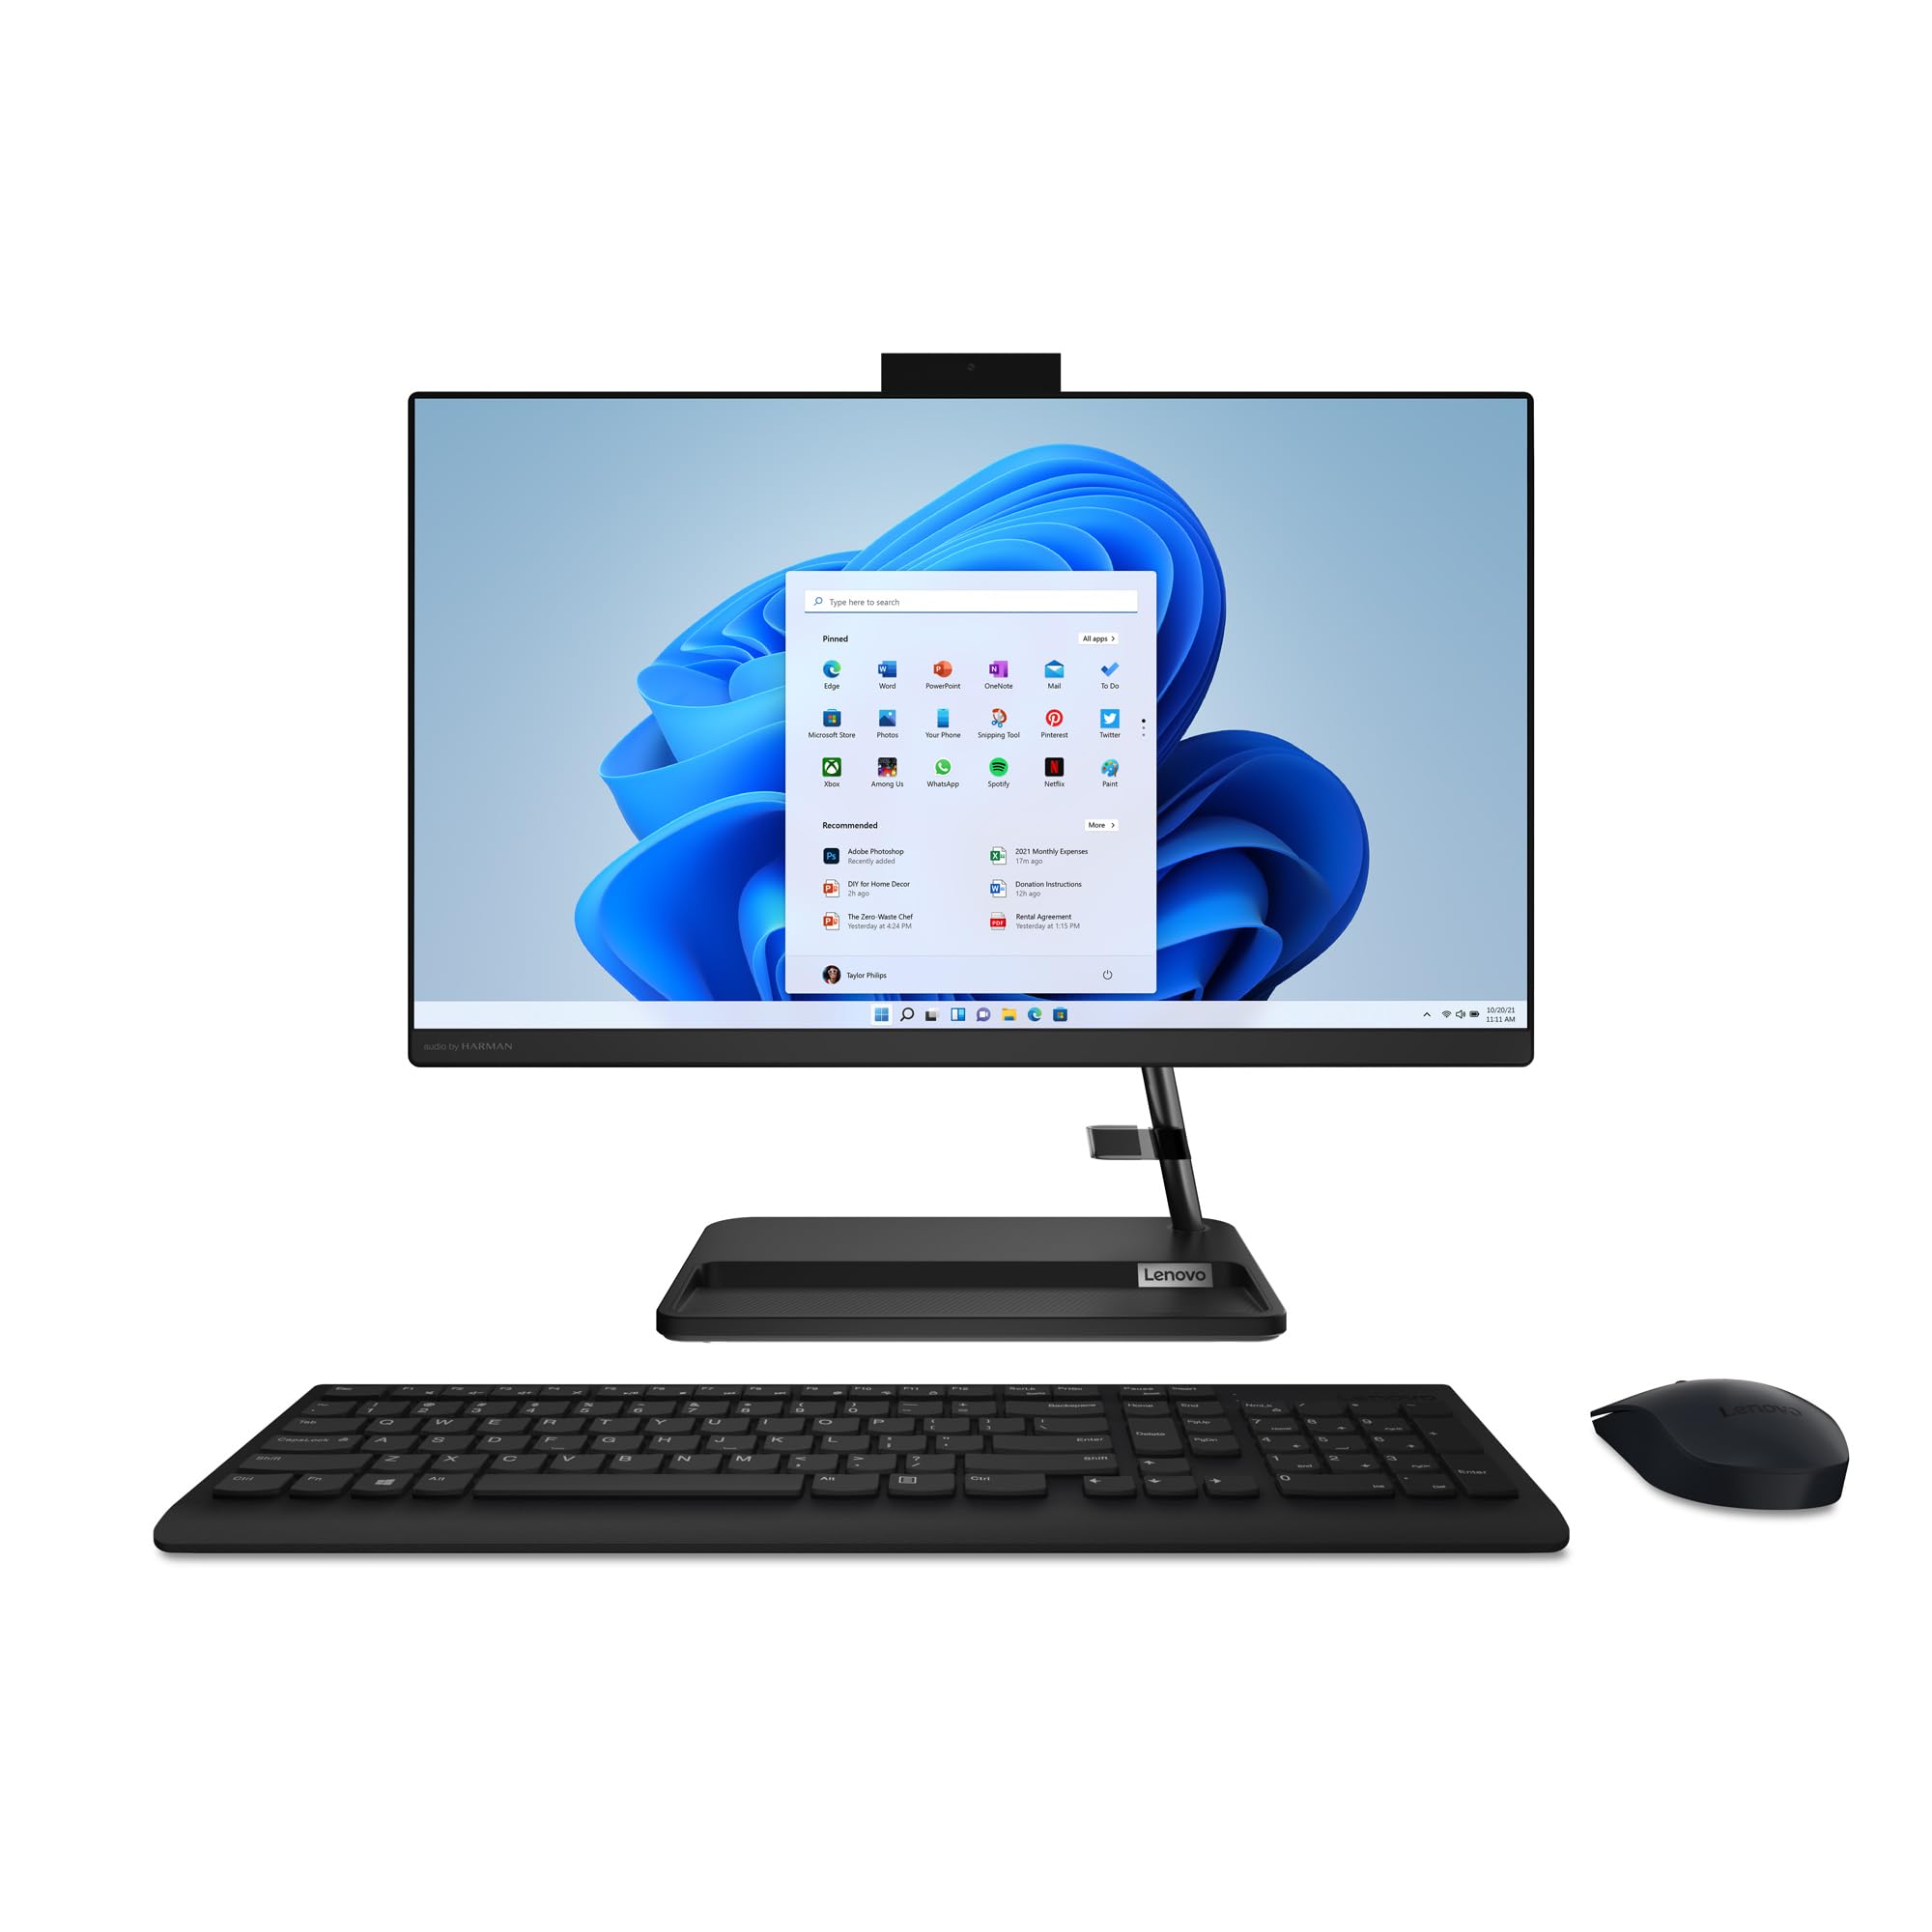 Lenovo IdeaCentre AIO 3i - (2023) - All in One Desktop - PC Computer - Mouse & Keyboard Included - 21.5